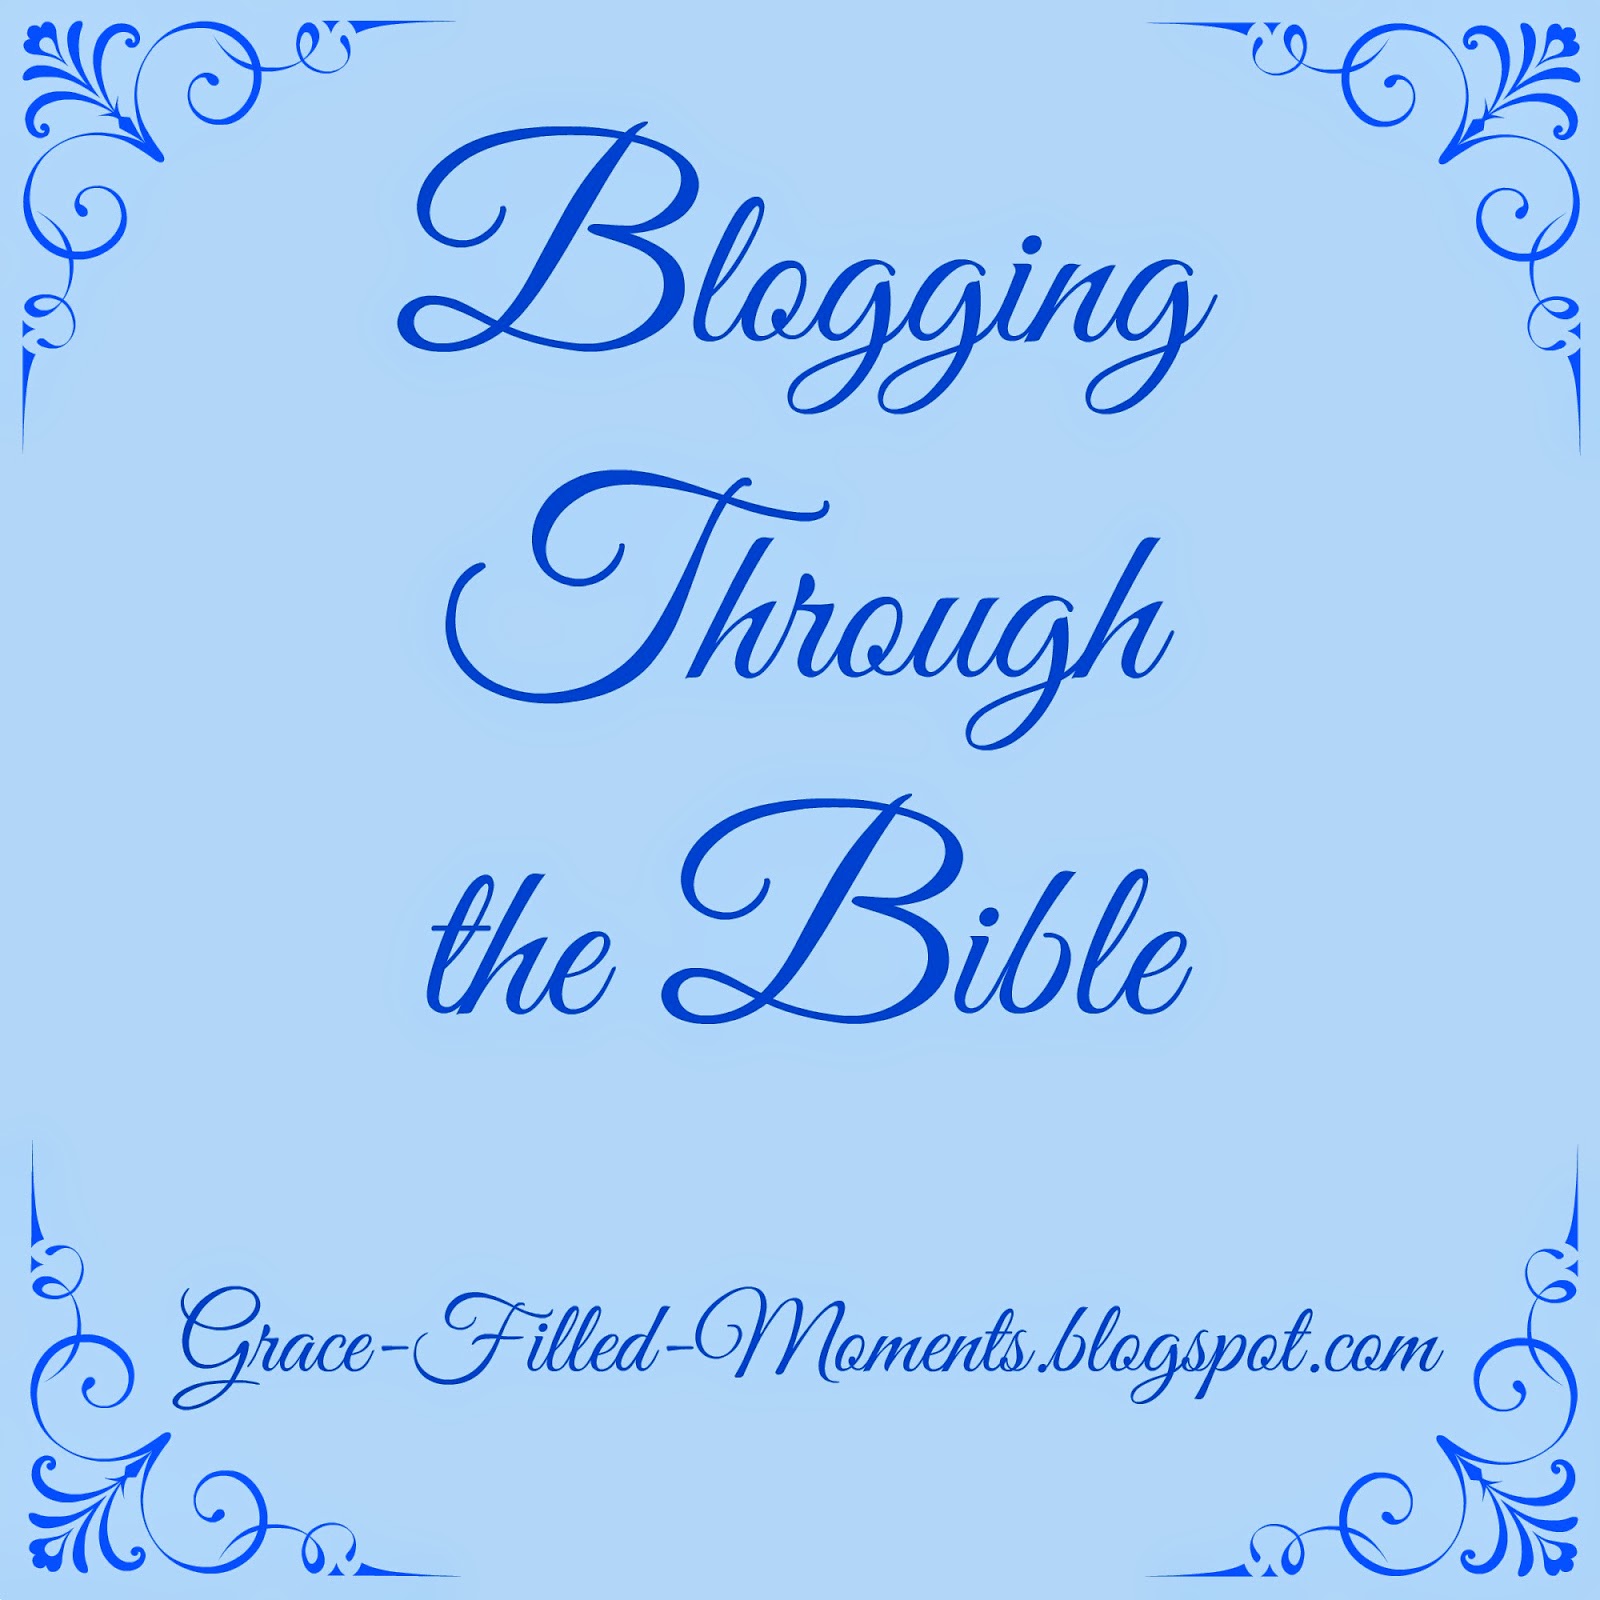 http://grace-filled-moments.blogspot.com/search/label/Blogging%20through%20the%20Bible